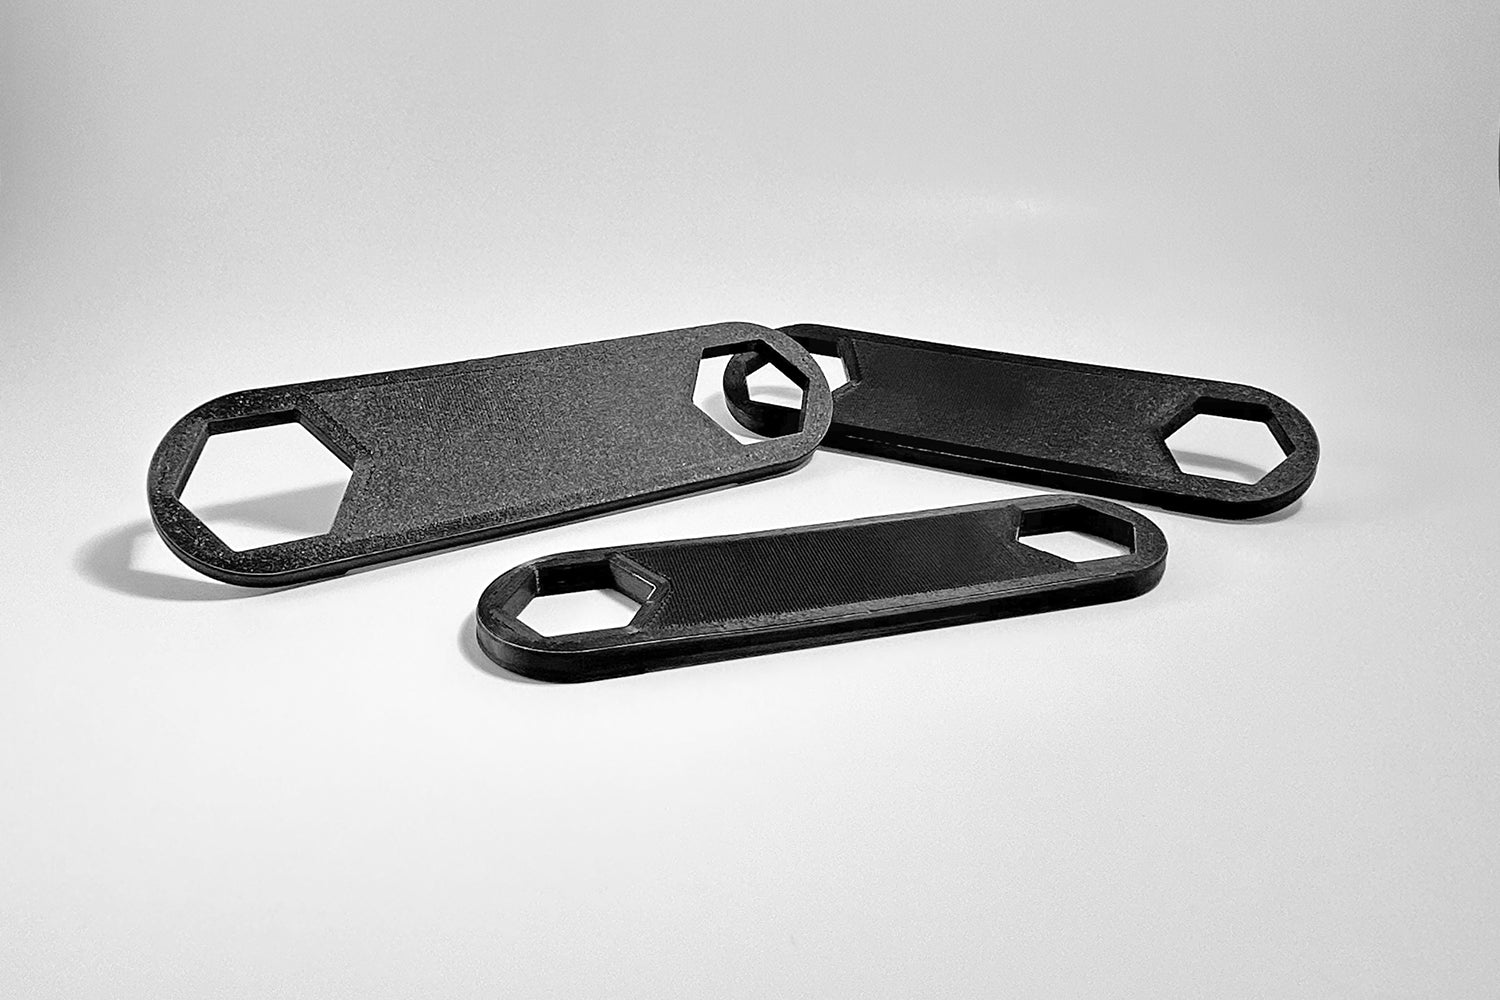 Full Set: Flat Spanners. 3D printed tools made in Canada for the MTB Home Mechanics that needs to play with their suspension setup